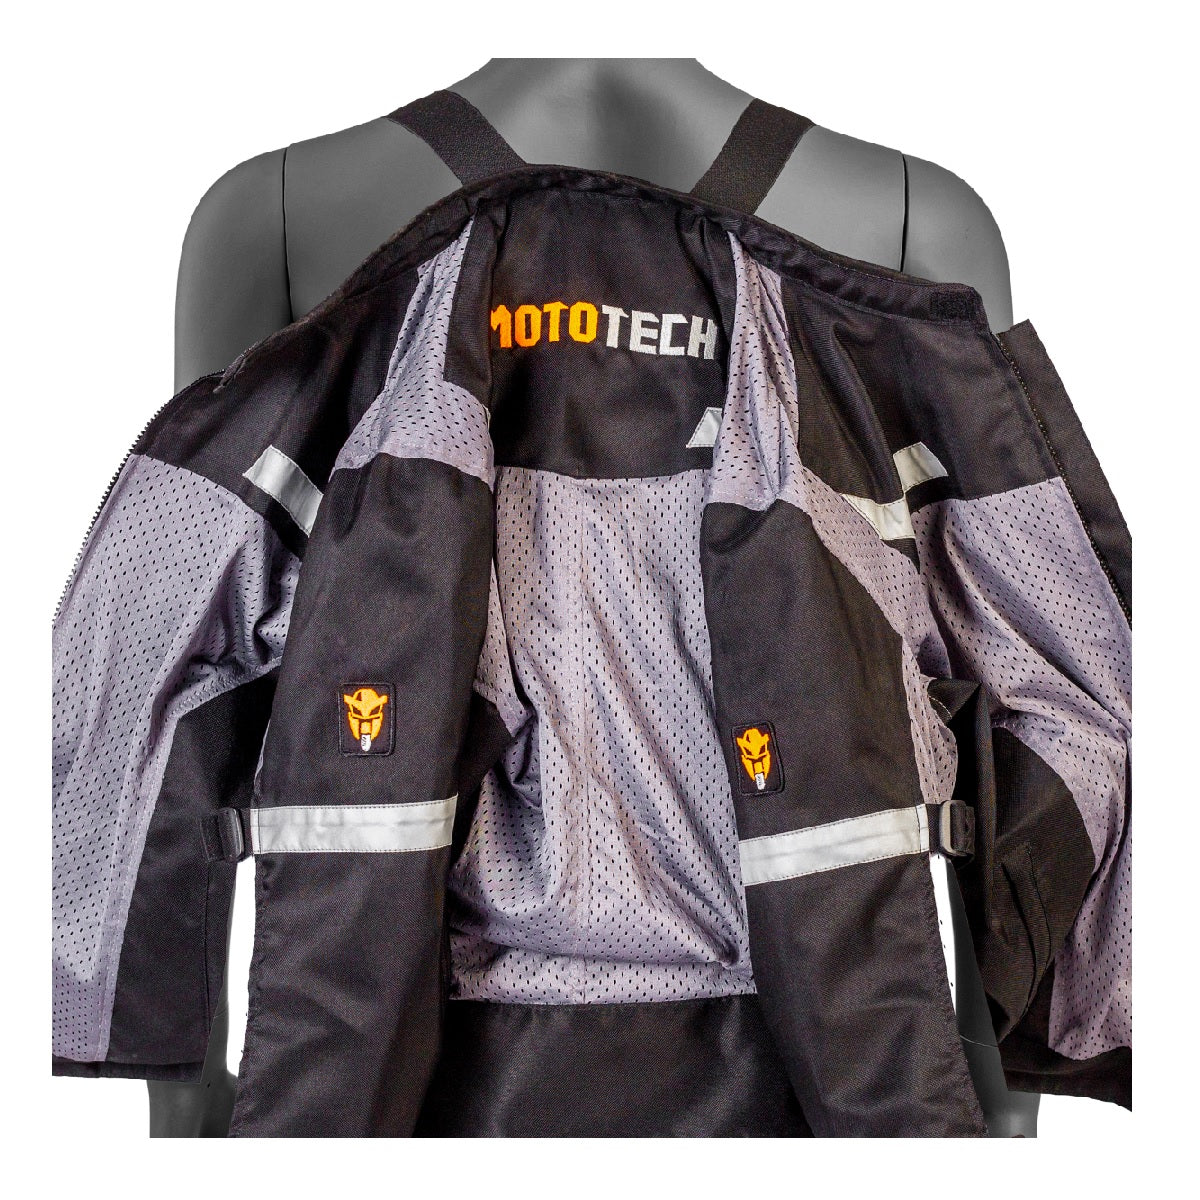 Reflex Air Flo Mesh Motorcycle Riding Jacket (without Armours)